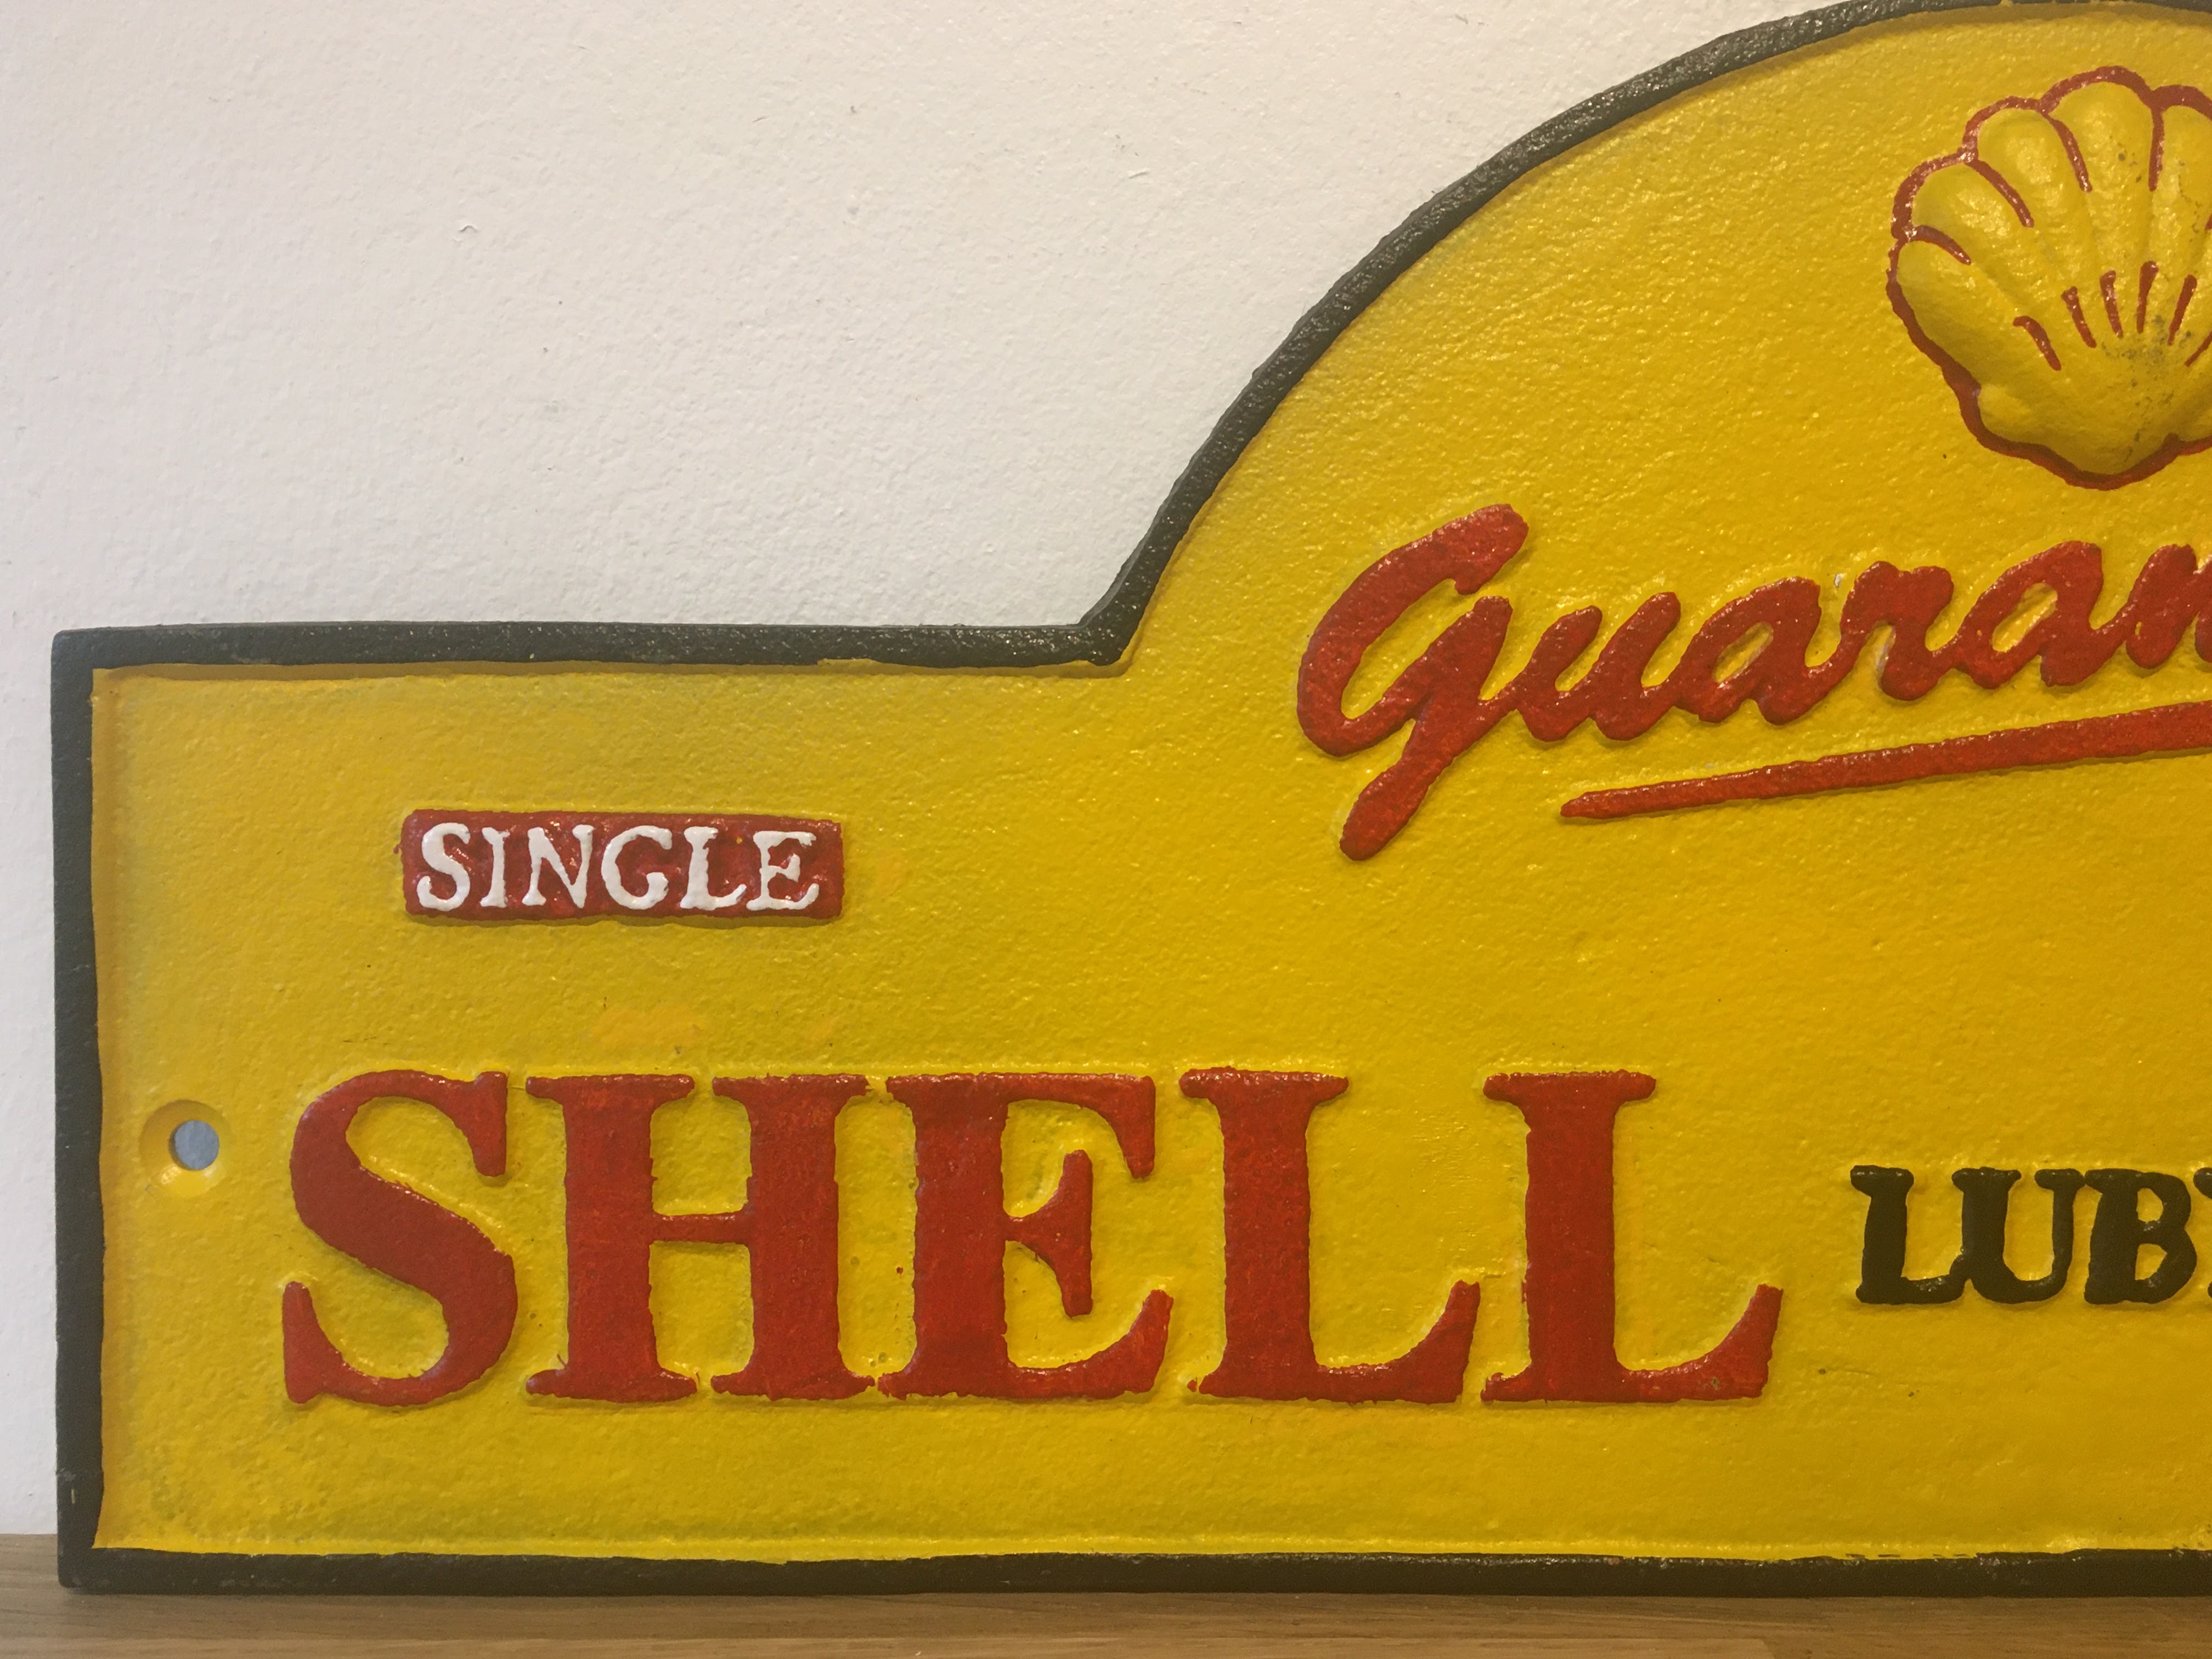 Shell Oil Cast Iron Sign - Image 3 of 4